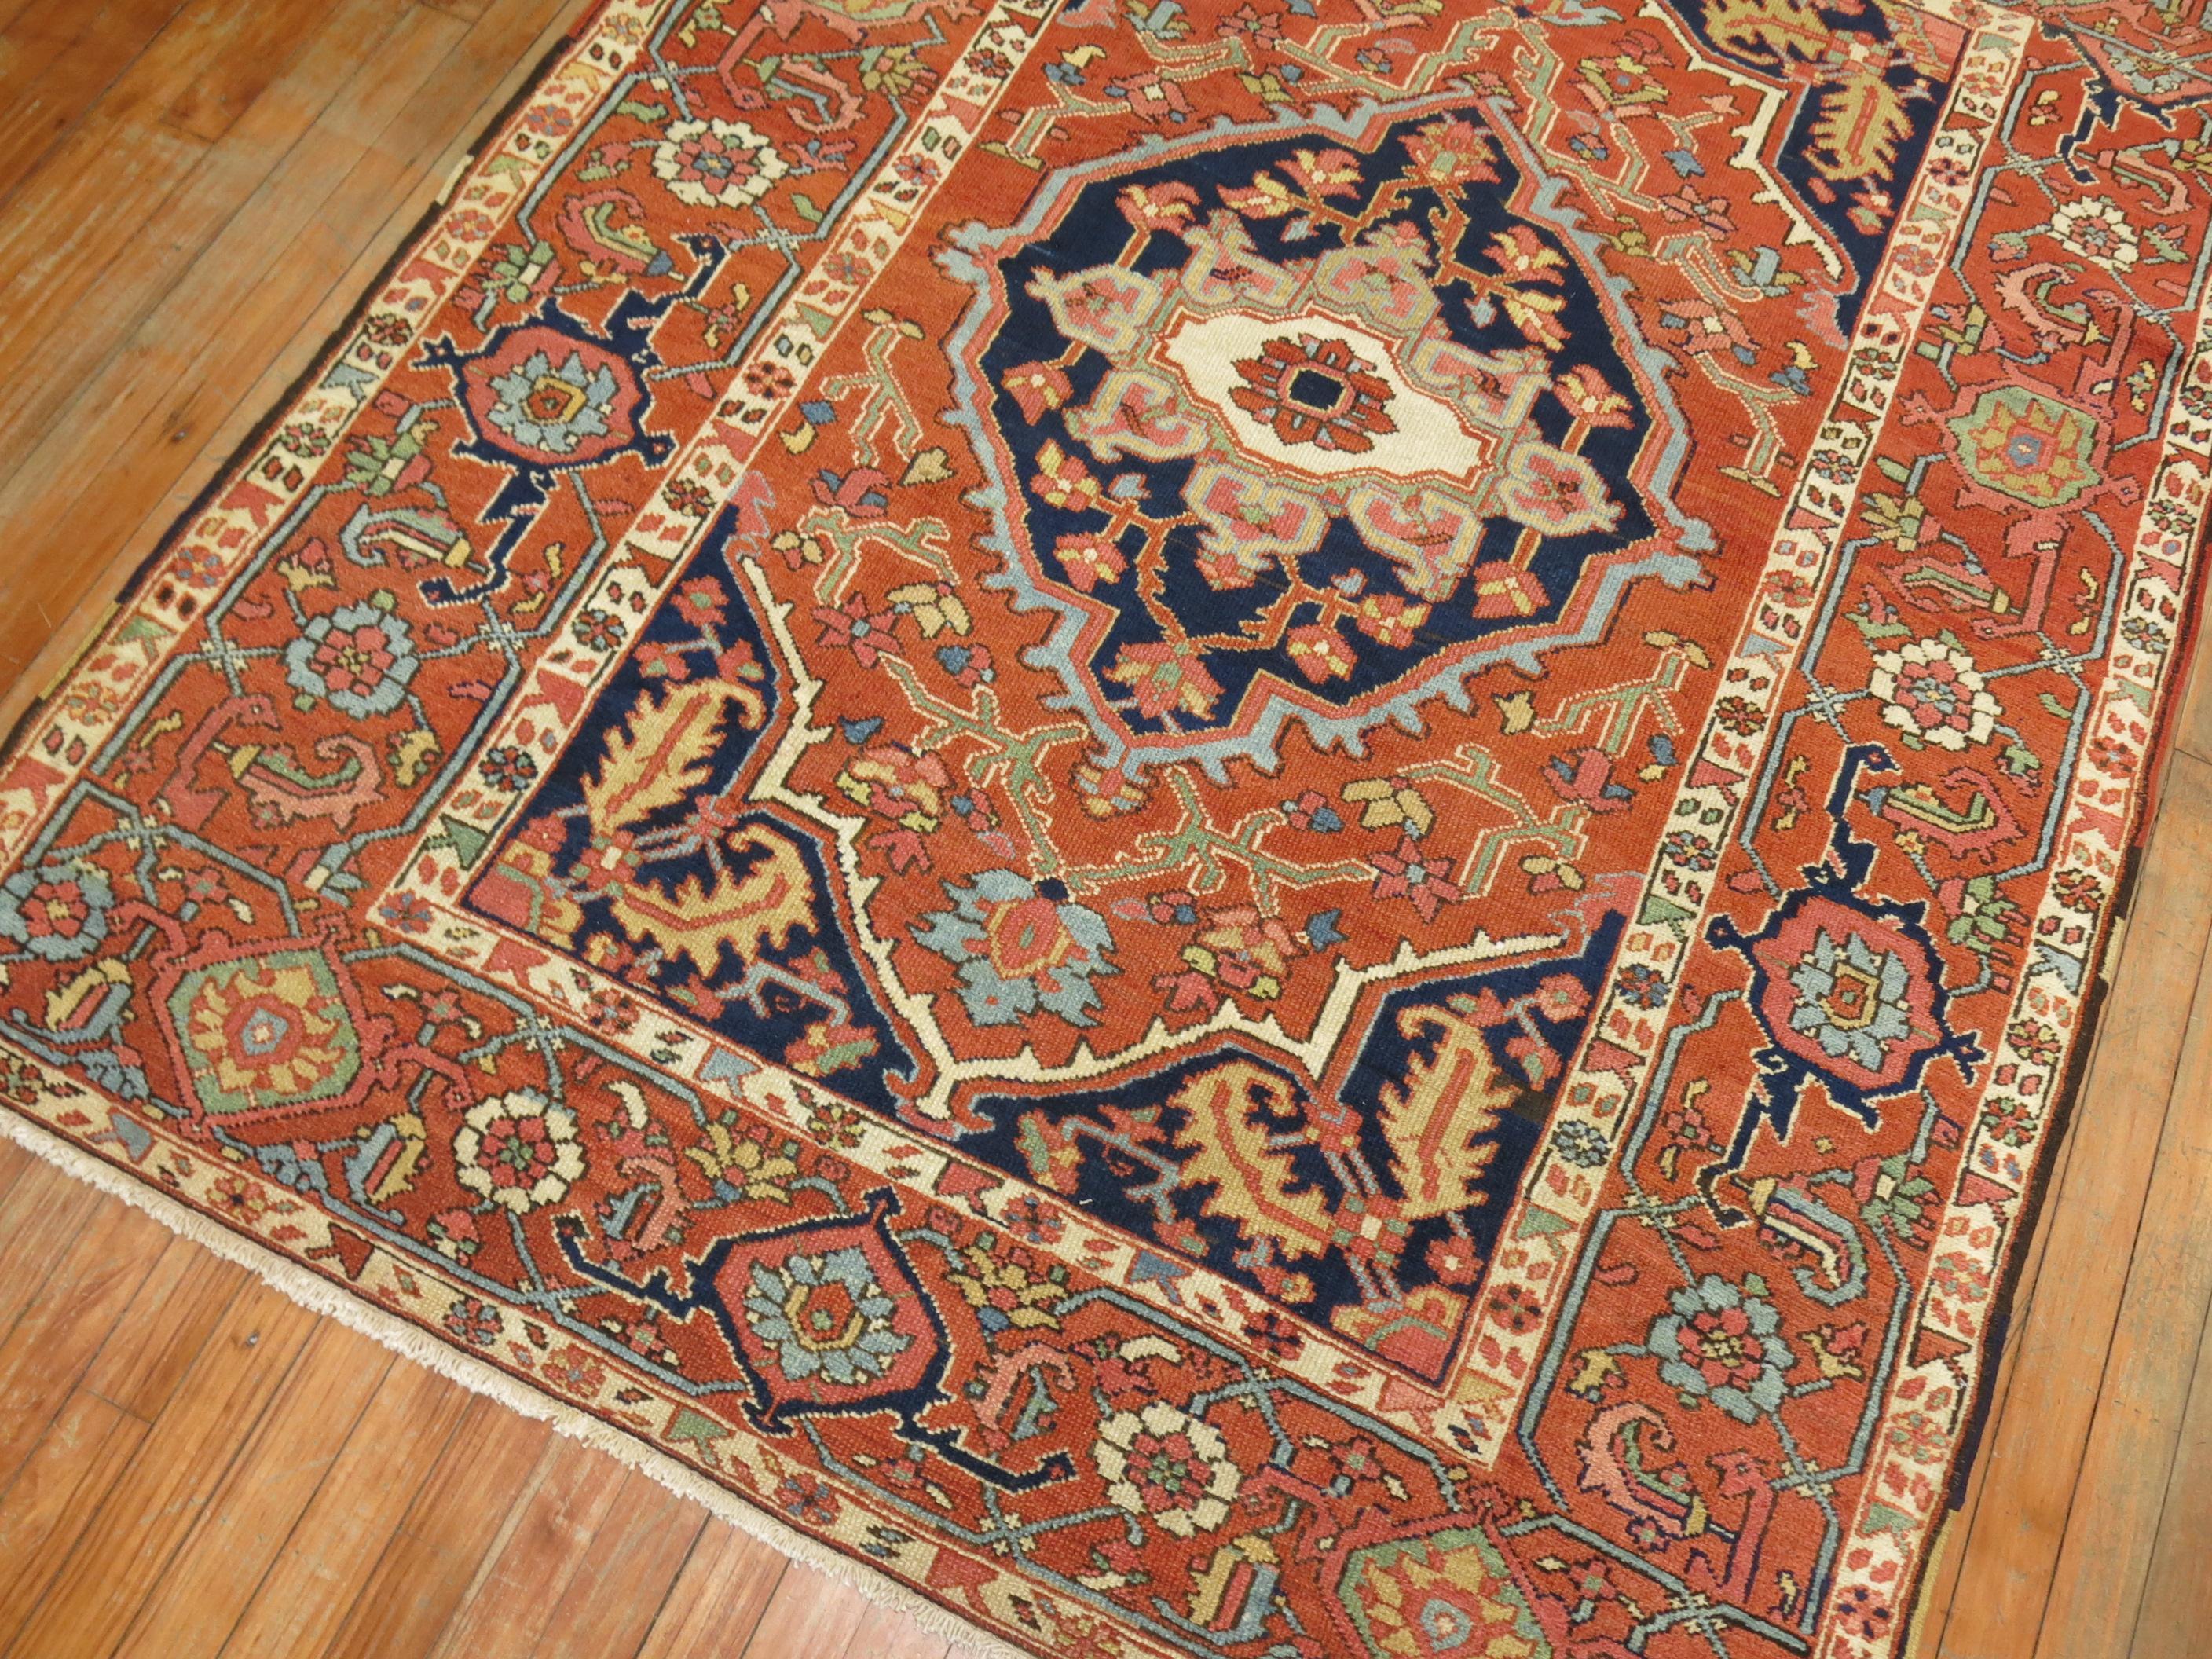 An extraordinary, authentic early 20th century Connoisseur caliber Persian Heriz Serapi rug with classic medallion and border motif.

Measures: 4'10'' x 6'3''

The Serapi rug can be traced back to the beginning of Persian handmade rug production